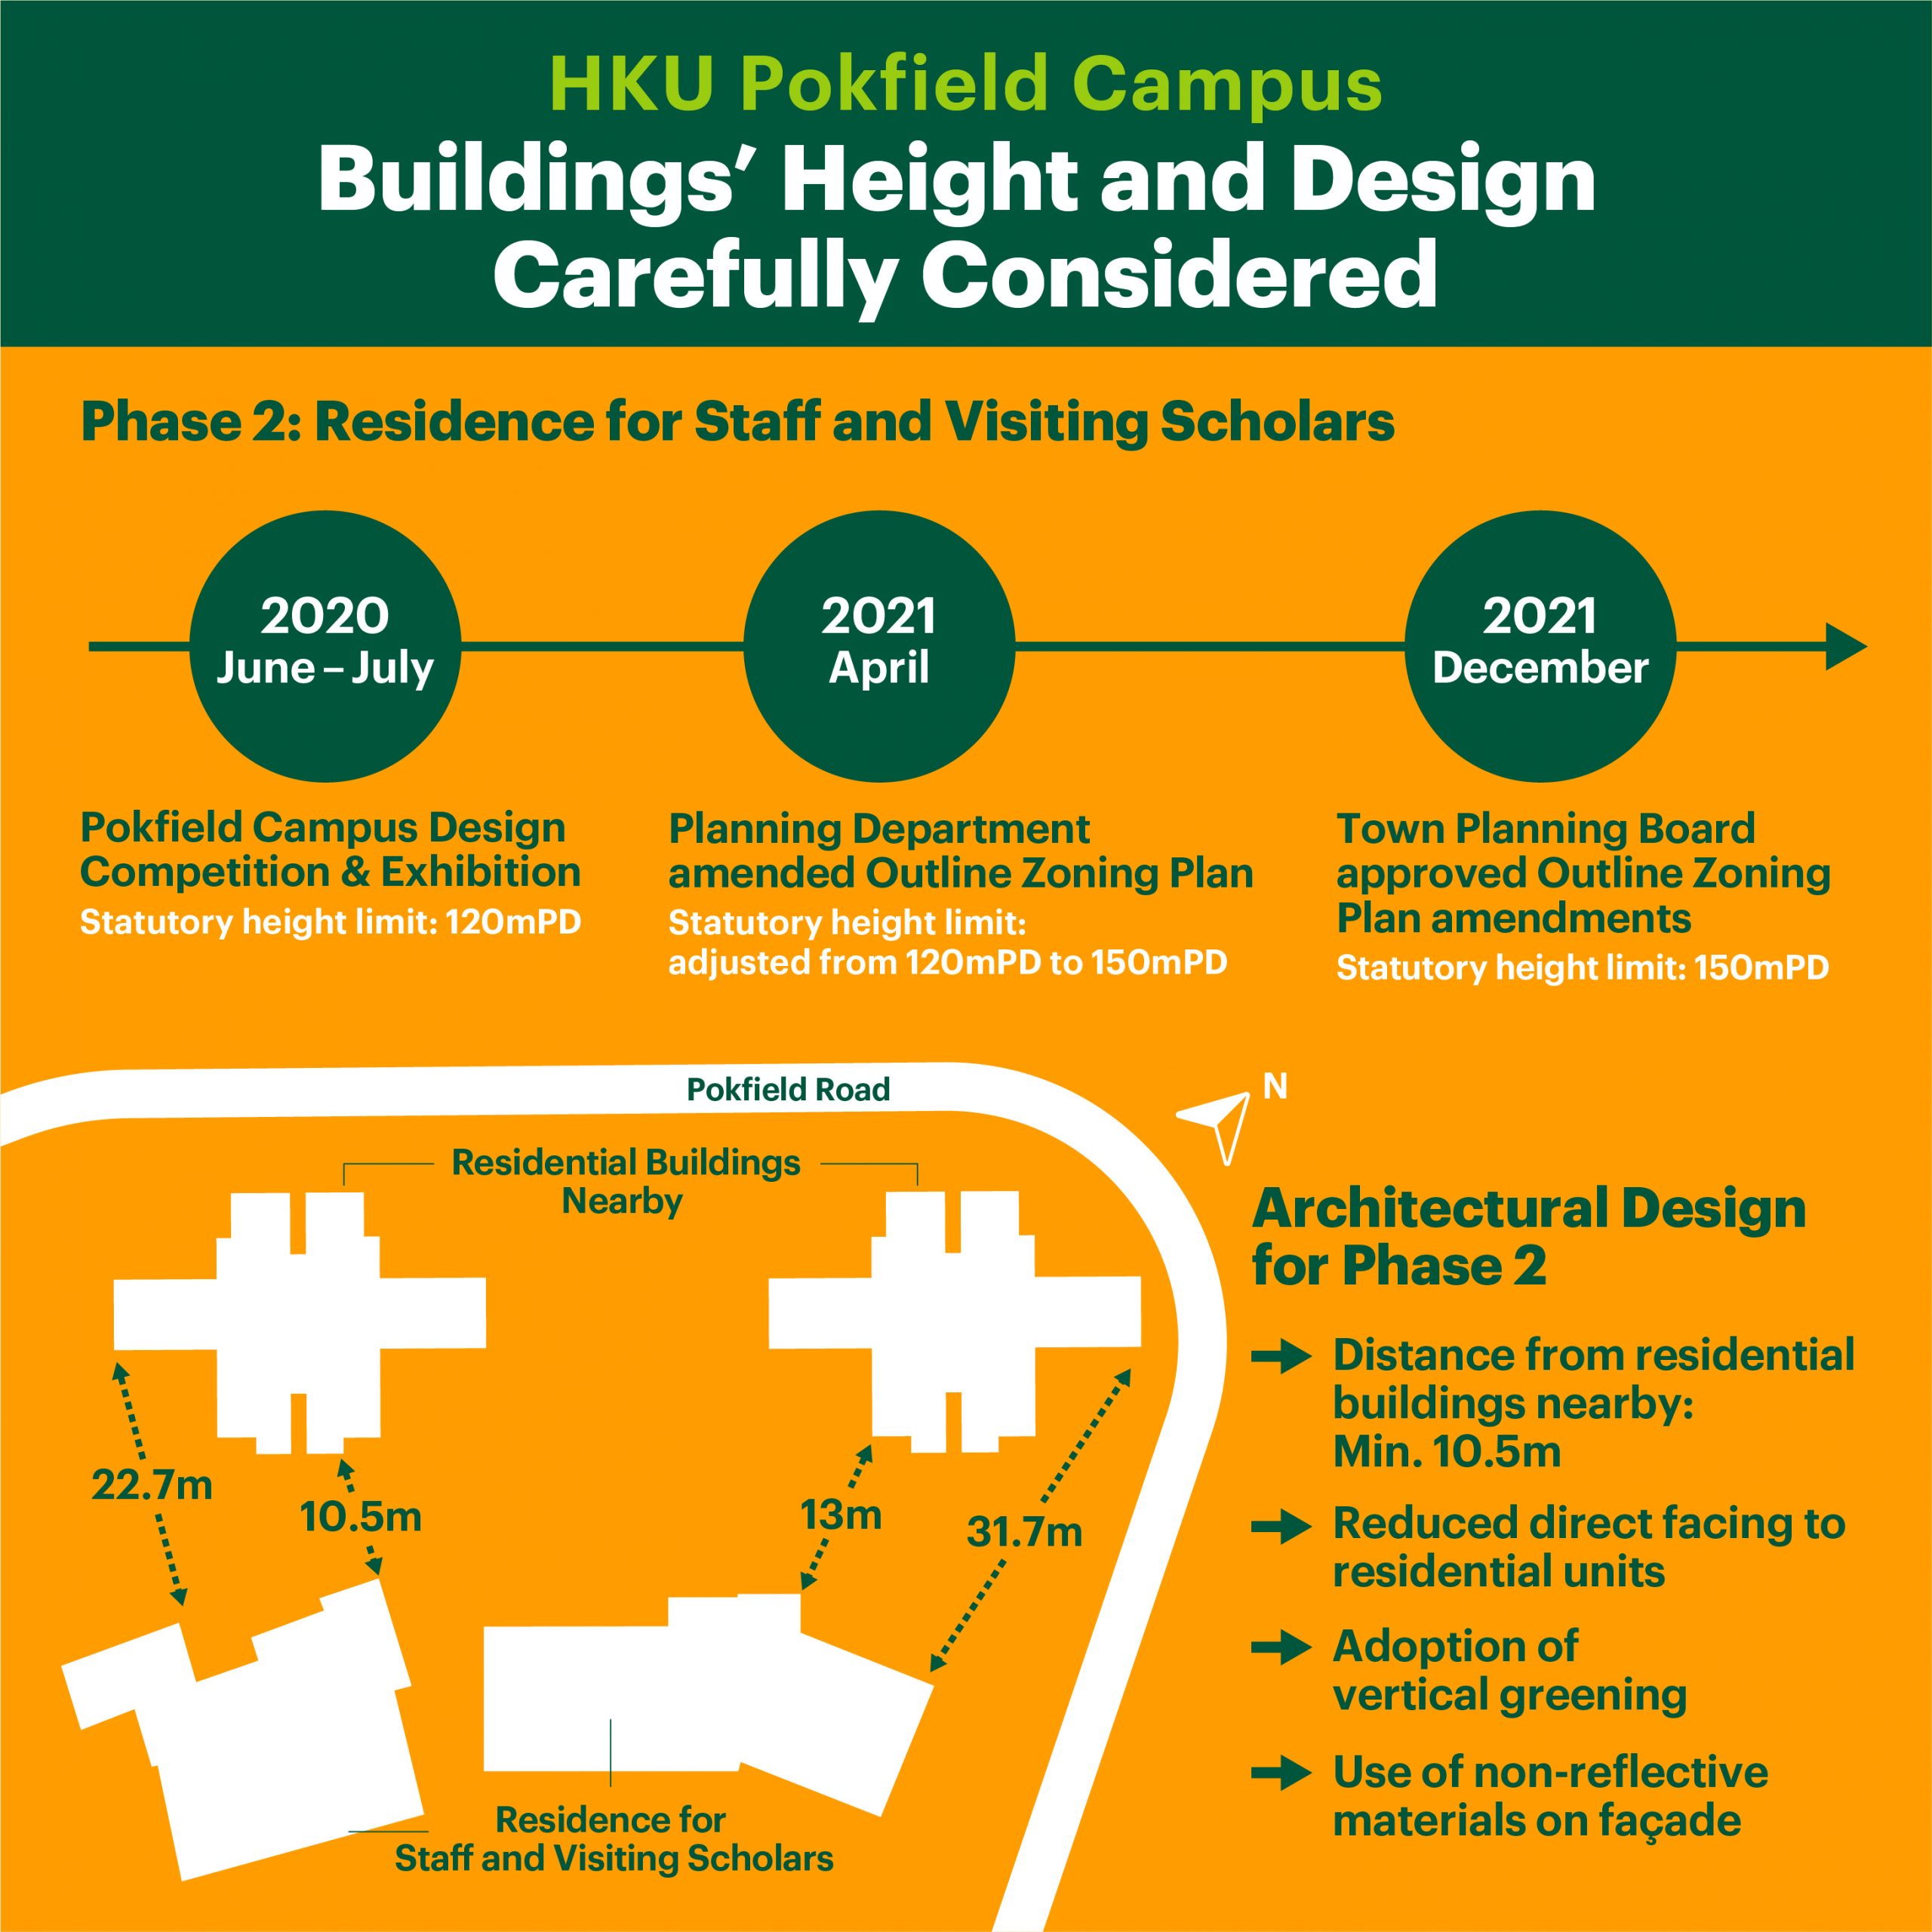 Buildings' height and design carefully considered